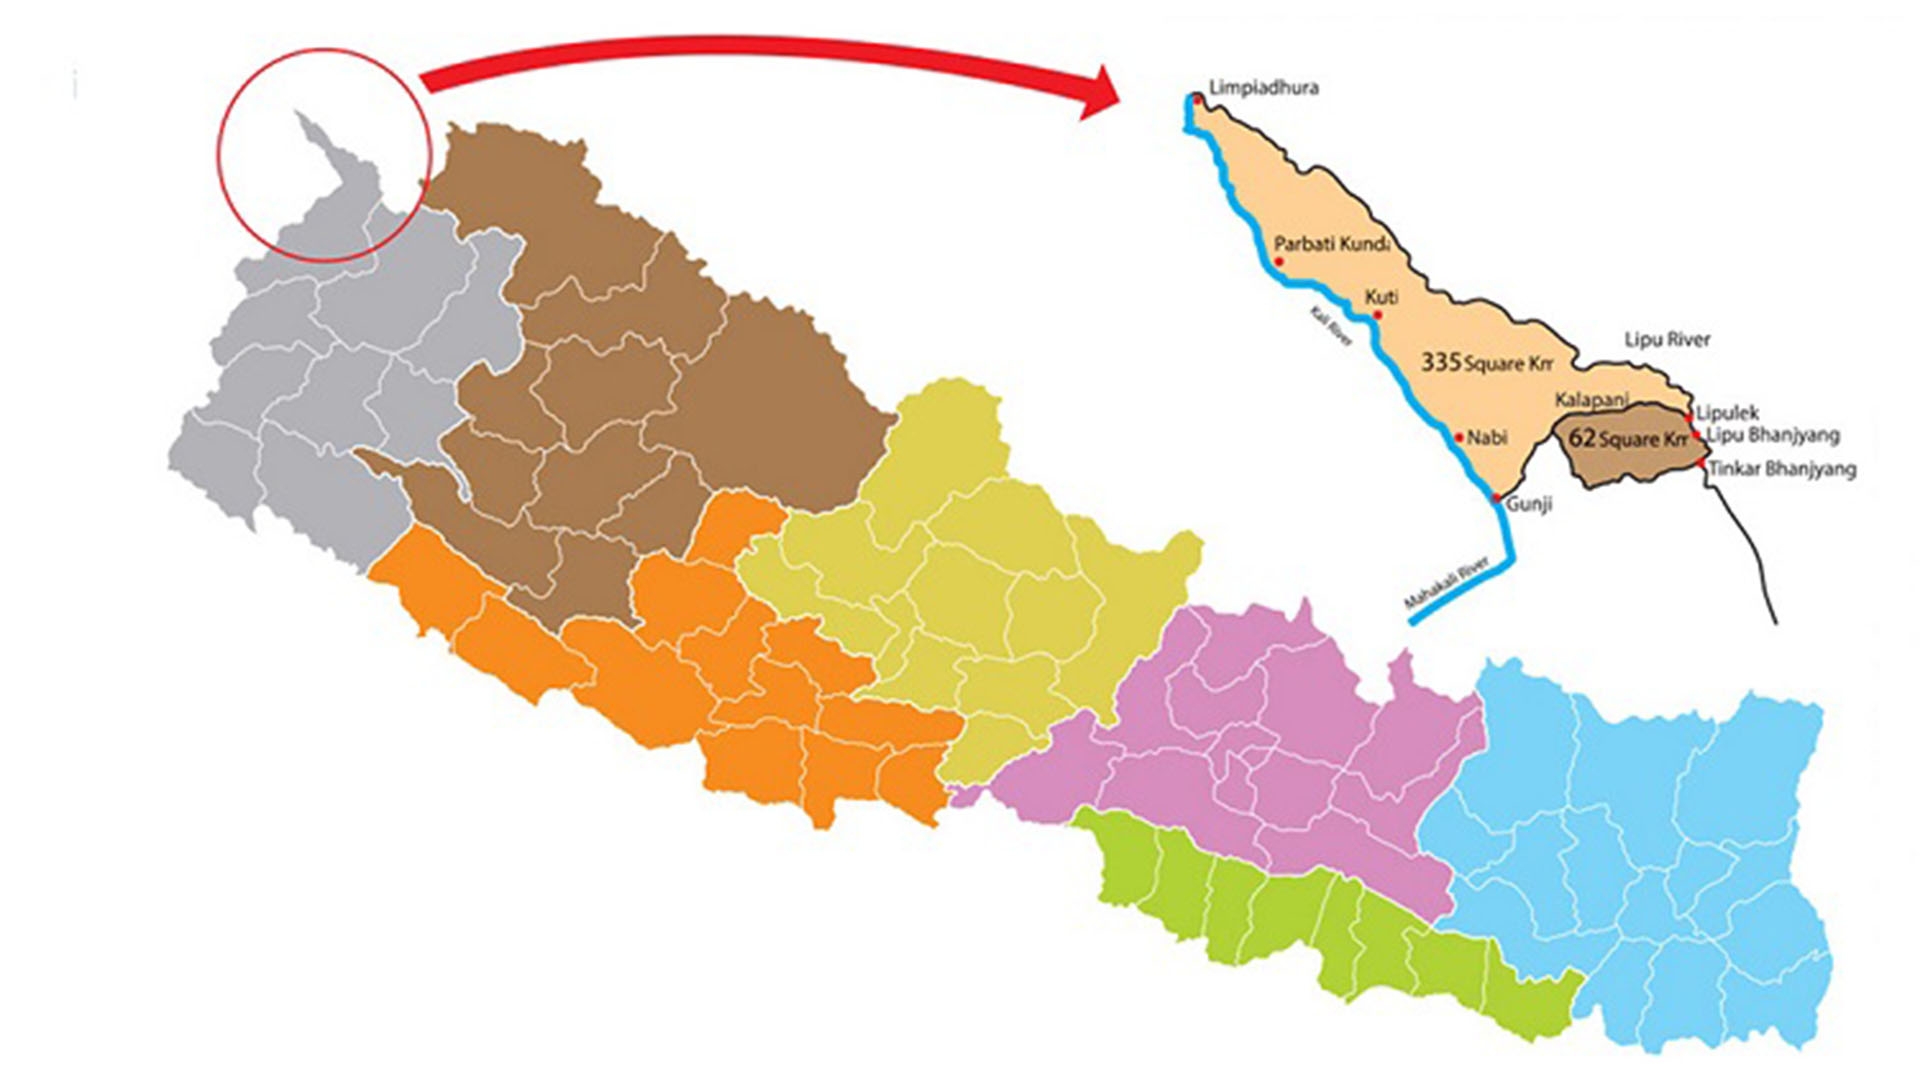 Approval of a new map of Nepal covering land encroached by India